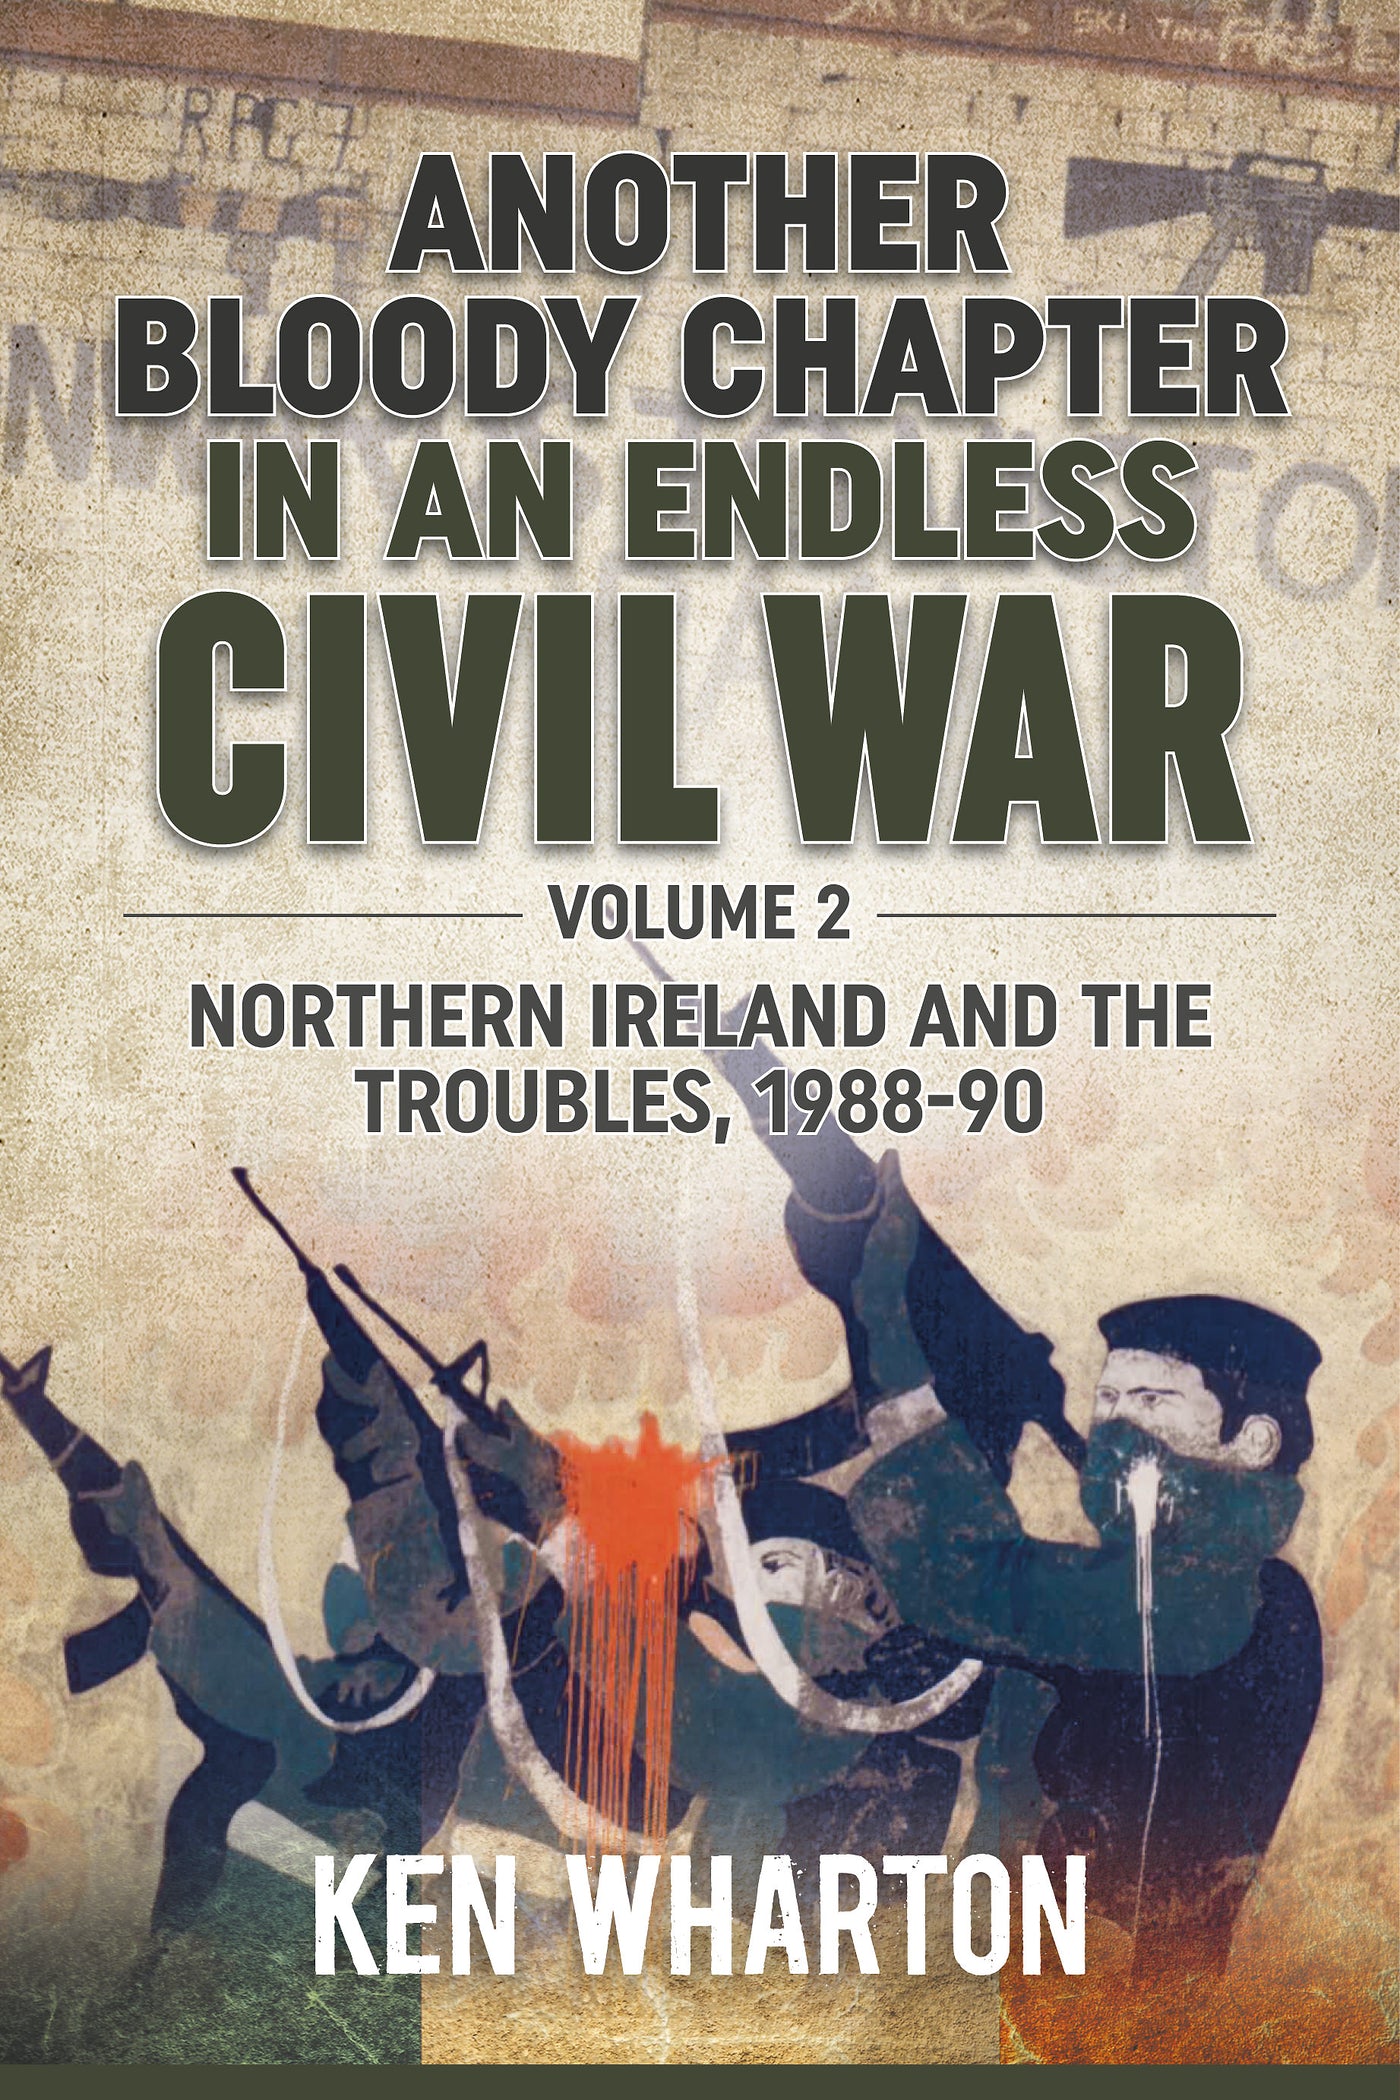 Another Bloody Chapter in an Endless Civil War. Volume 2